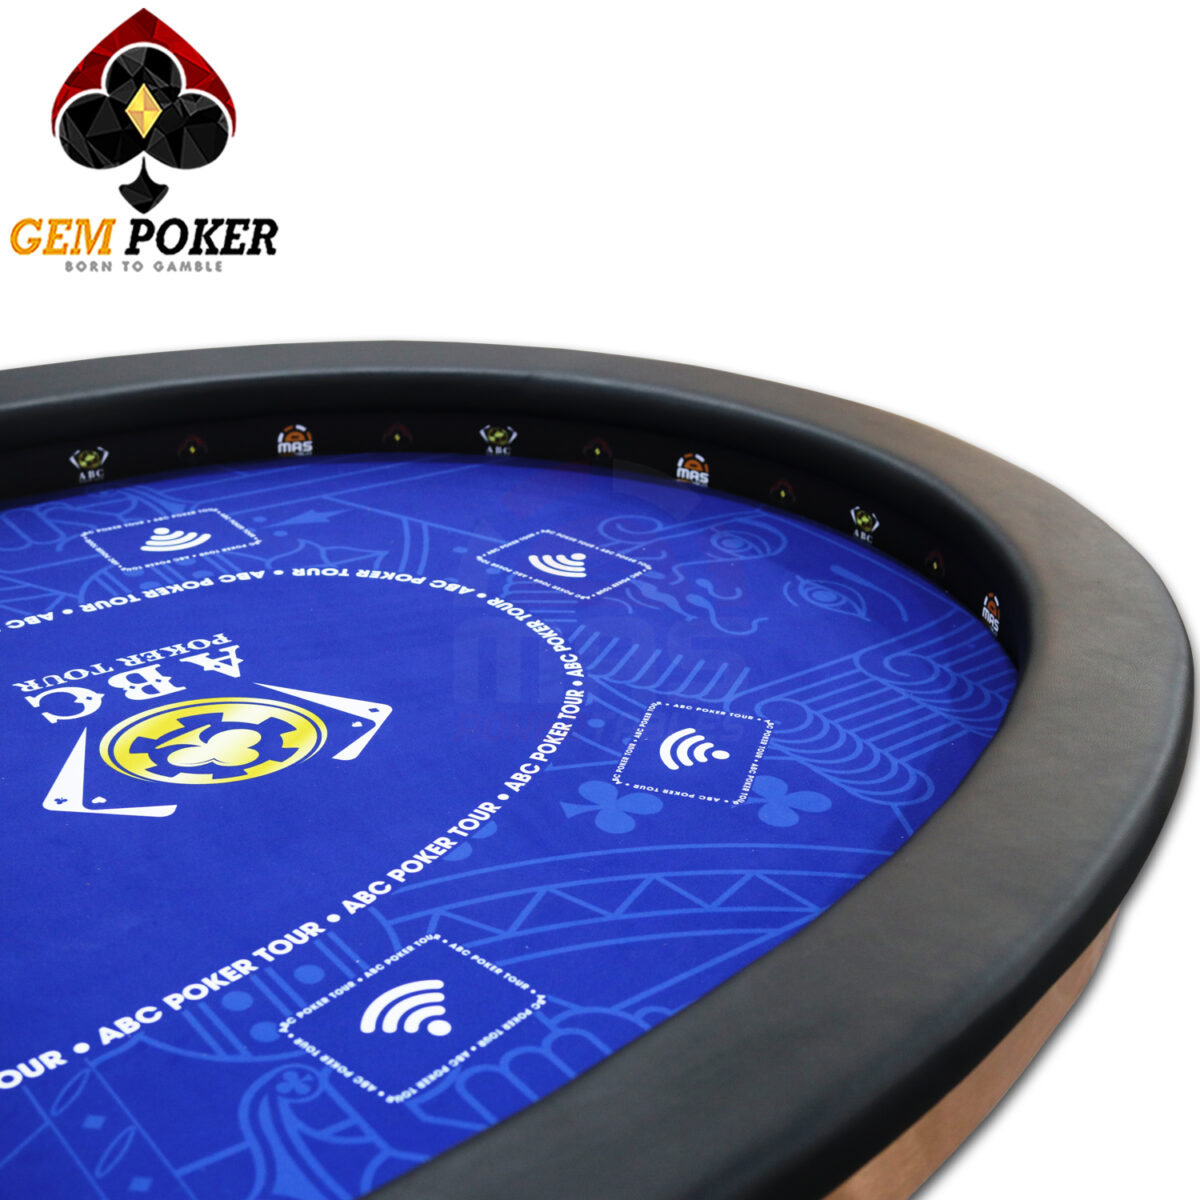 POKER TABLE ABC RFID LIVE STREAMING